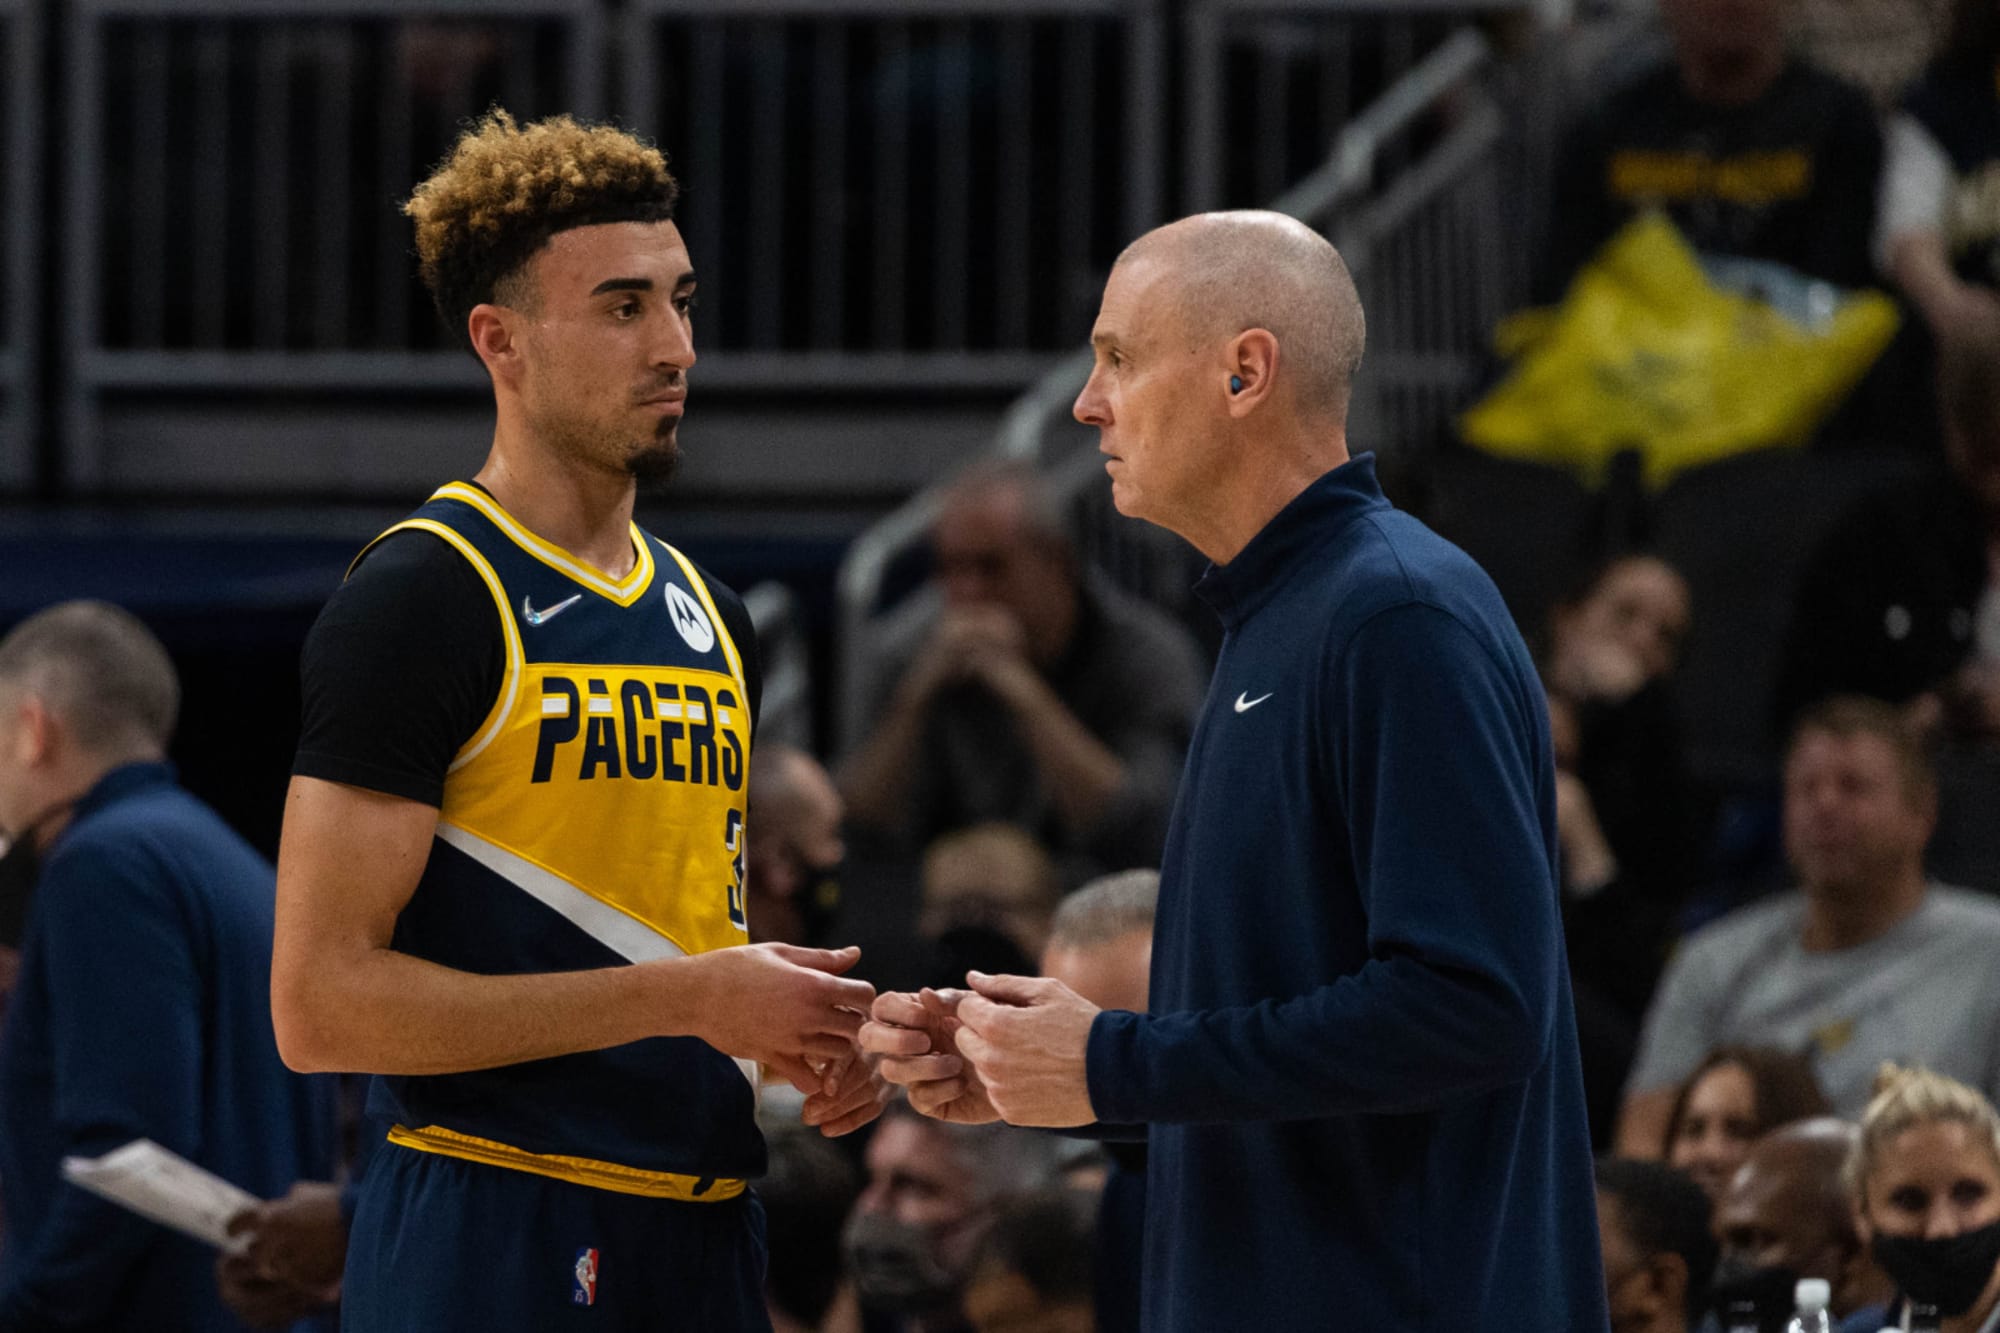 Chris Duarte was surprised by trade from Indiana Pacers, excited